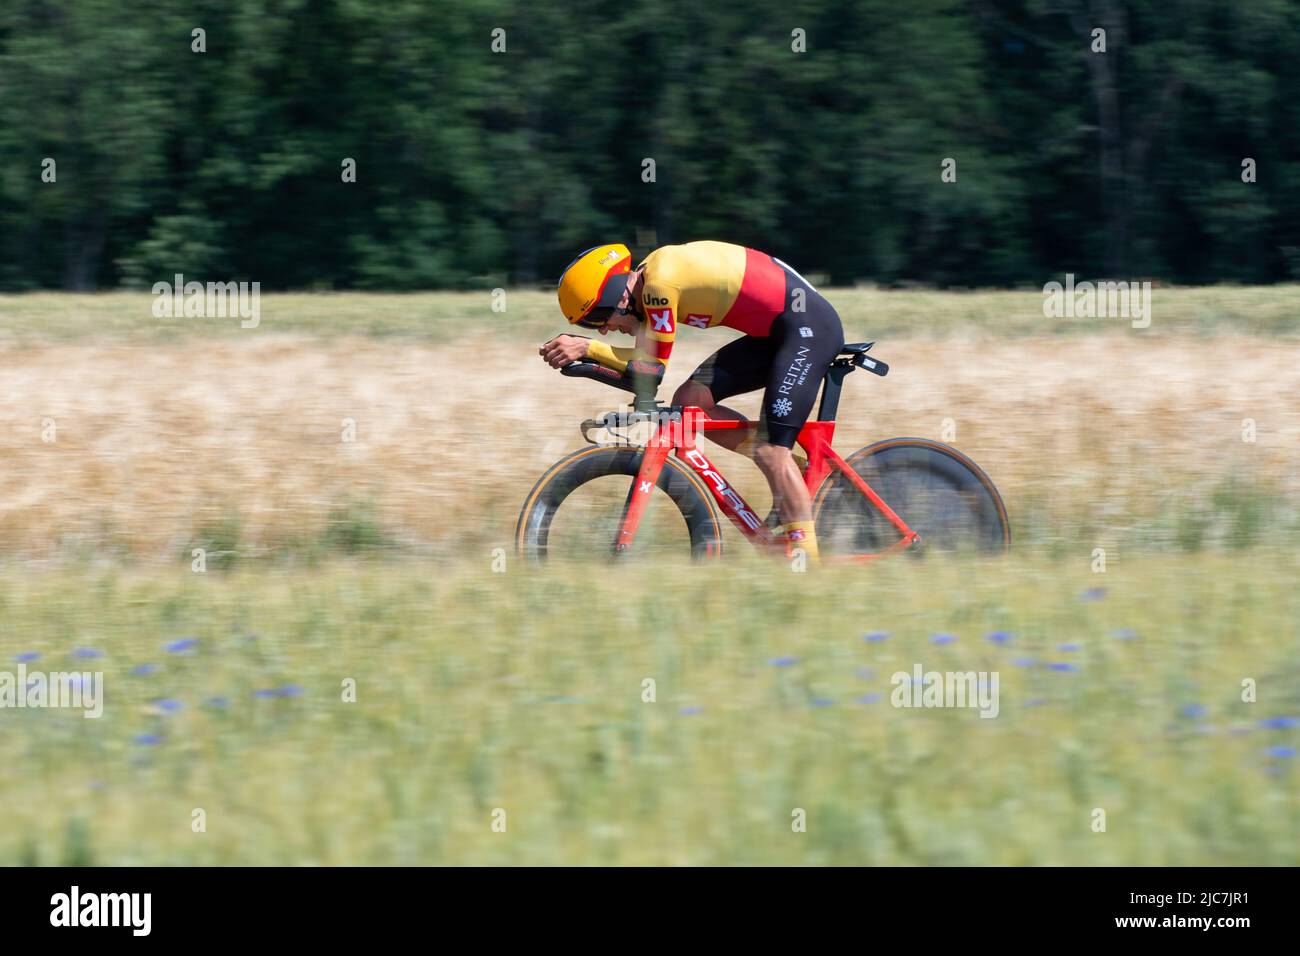 Montbrison, France. 08th June, 2022. Tobias Halland Johannessen (Uno-X Pro Cycling Team) seen in action during the 4th Stage of Criterium du Dauphine 2022 This is an individual time trial stage with a distance of 31.9 km between Montbrison and La Bâtie d'Urfé in the Loire department. The winner of the stage was Filippo Ganna (Ineos Grenadiers Team) in 35mn 32s. He is ahead of Wout Van Aert (Jumbo Visma Team) (Photo by Laurent Coust/SOPA Images/Sipa USA) Credit: Sipa USA/Alamy Live News Stock Photo